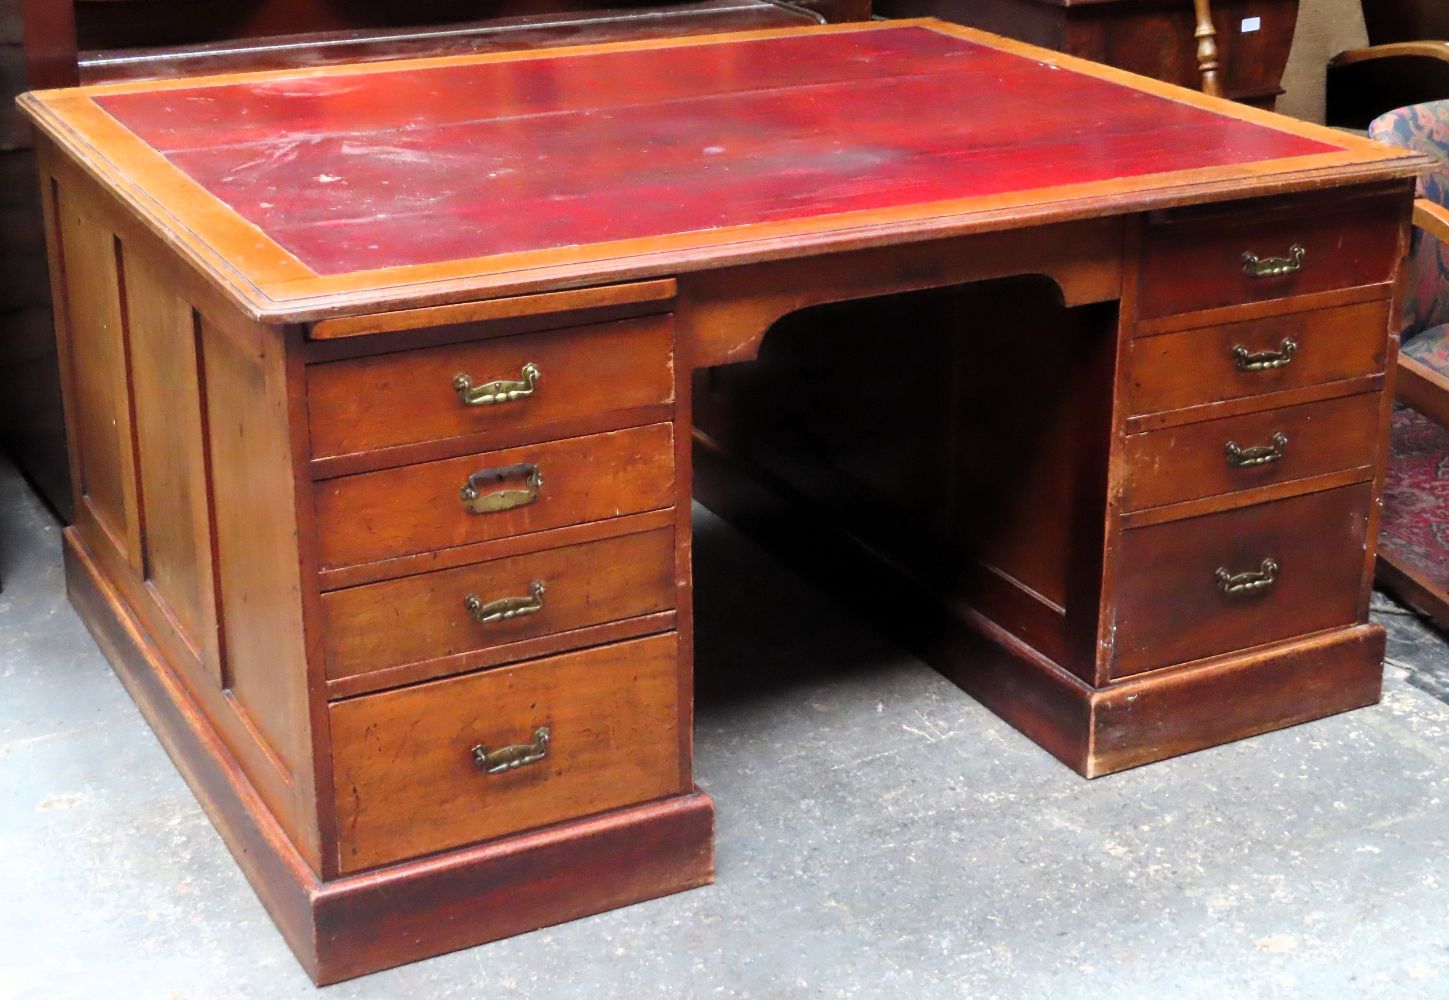 Cato Crane's Antique & Mid Century Furniture and Collectables Timed Auction